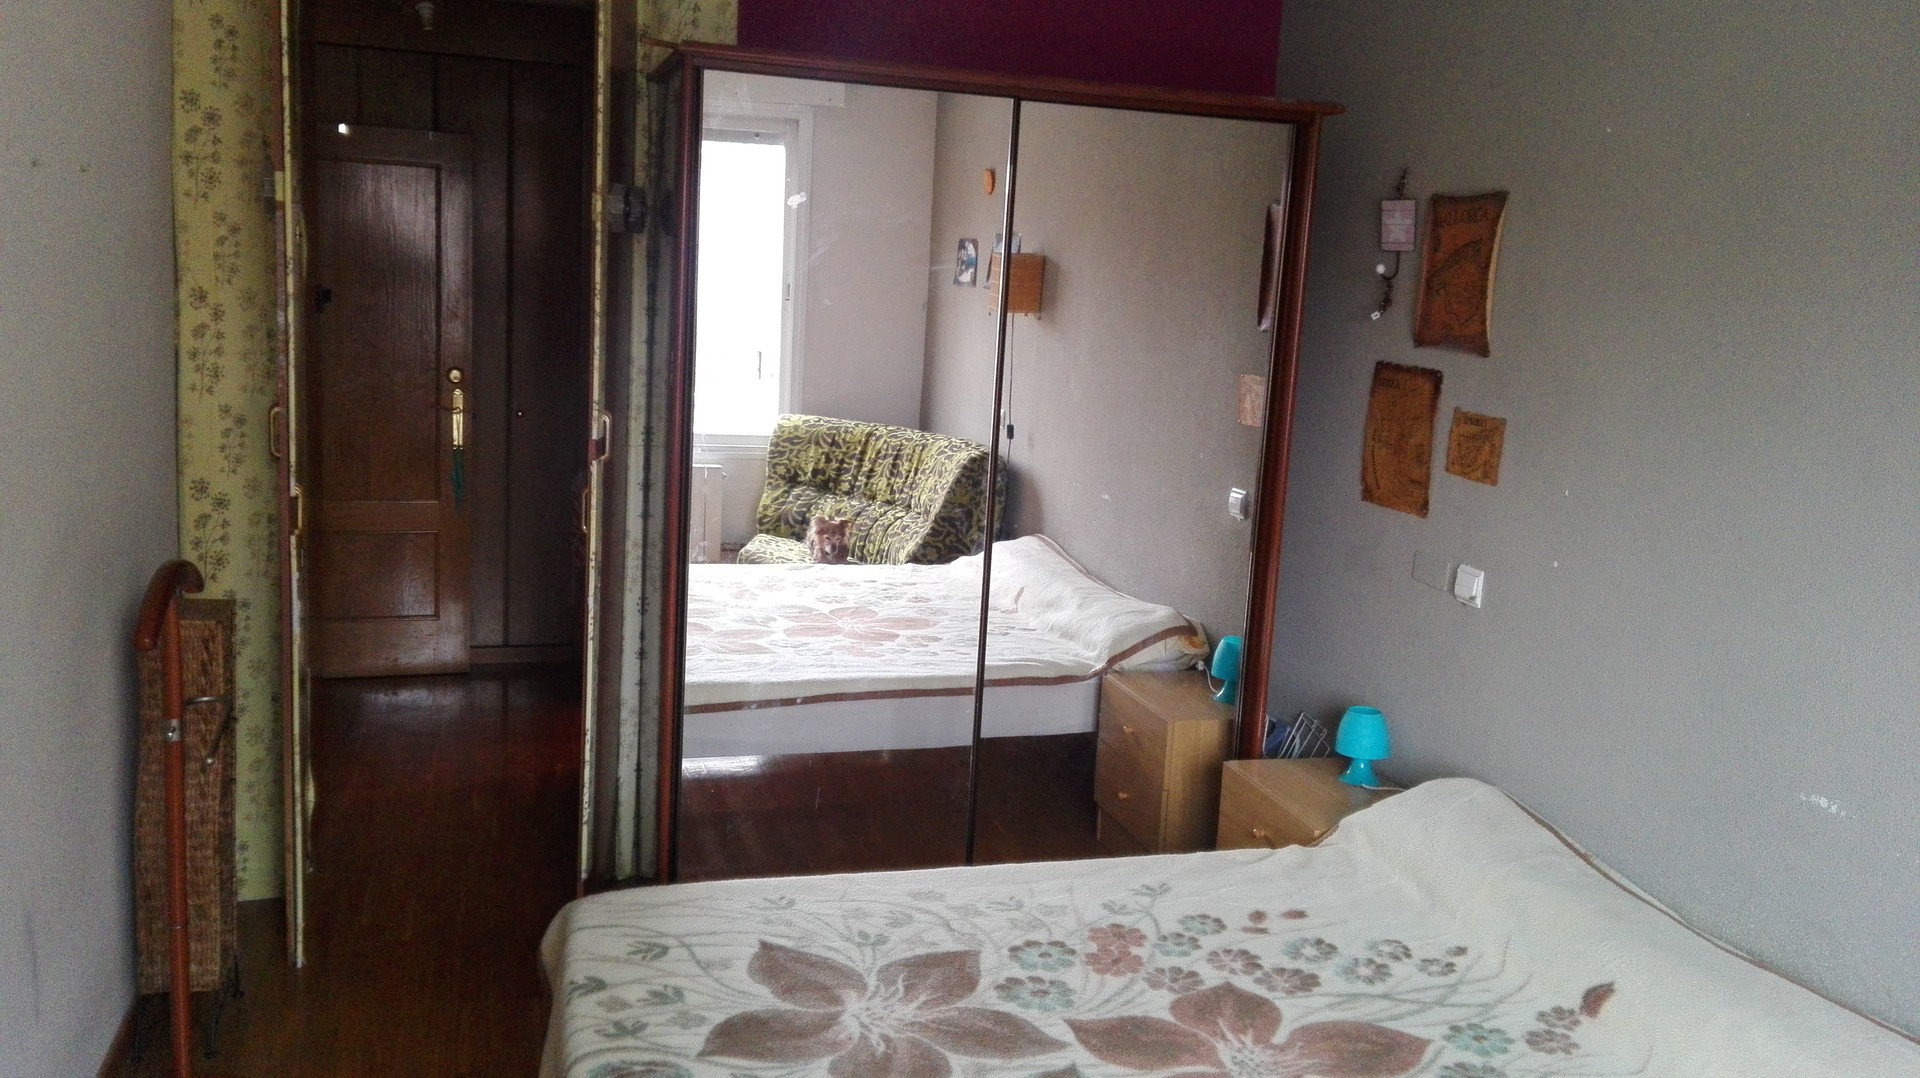 Large and comfortable room with lots of light and 